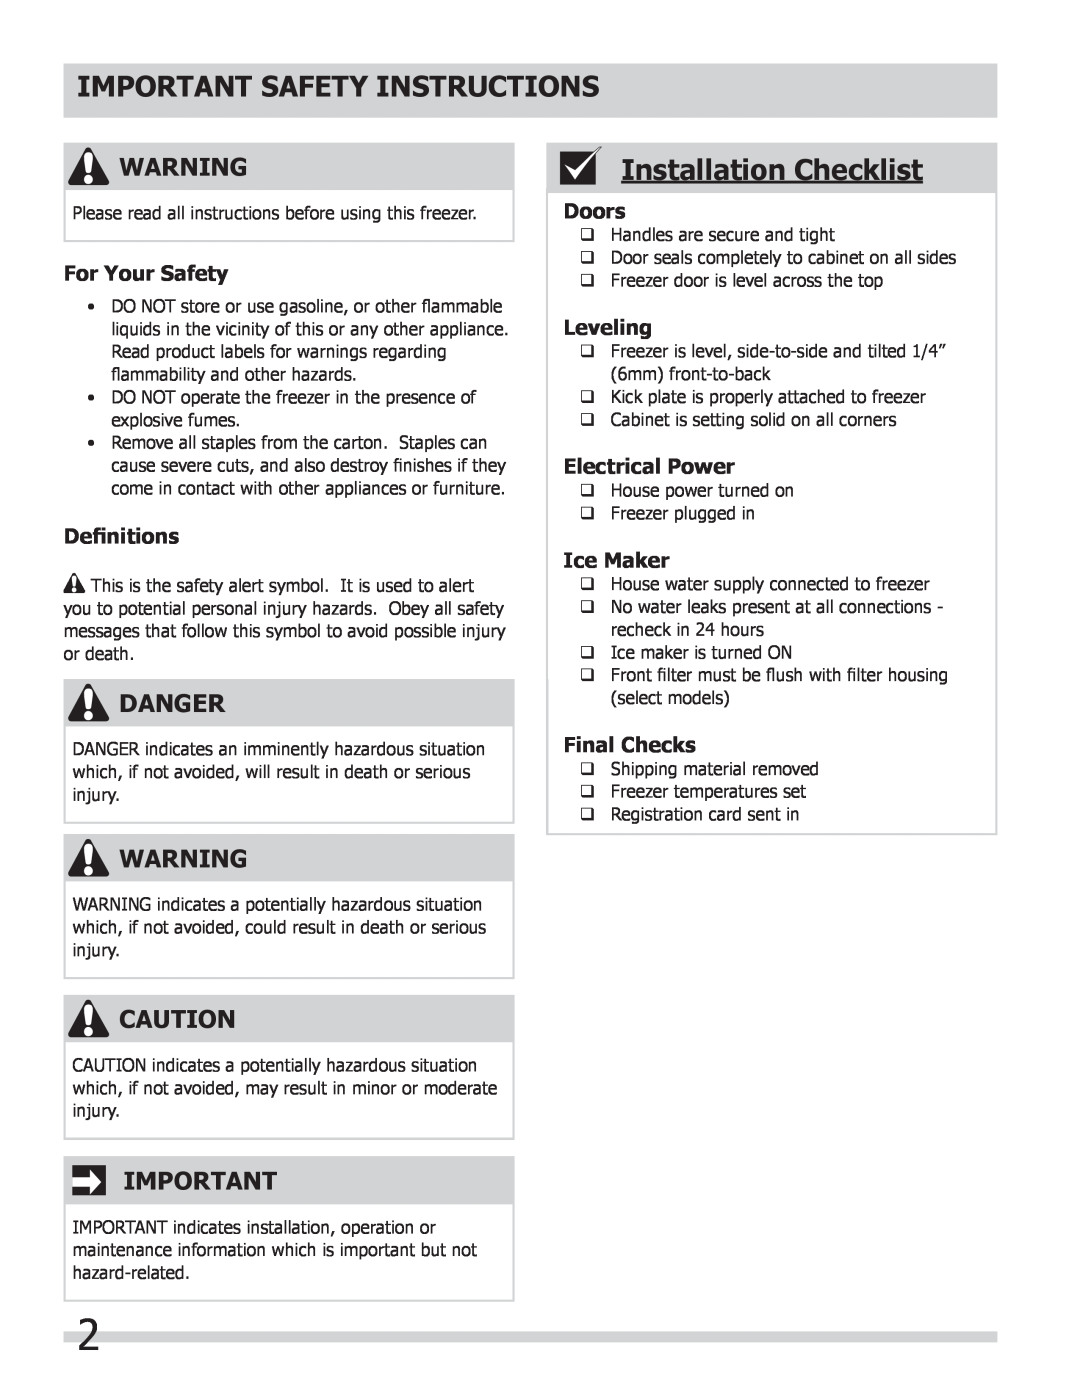 Frigidaire FPUH19D7LF Important Safety Instructions, Installation Checklist, Danger, For Your Safety, Deﬁnitions, Doors 